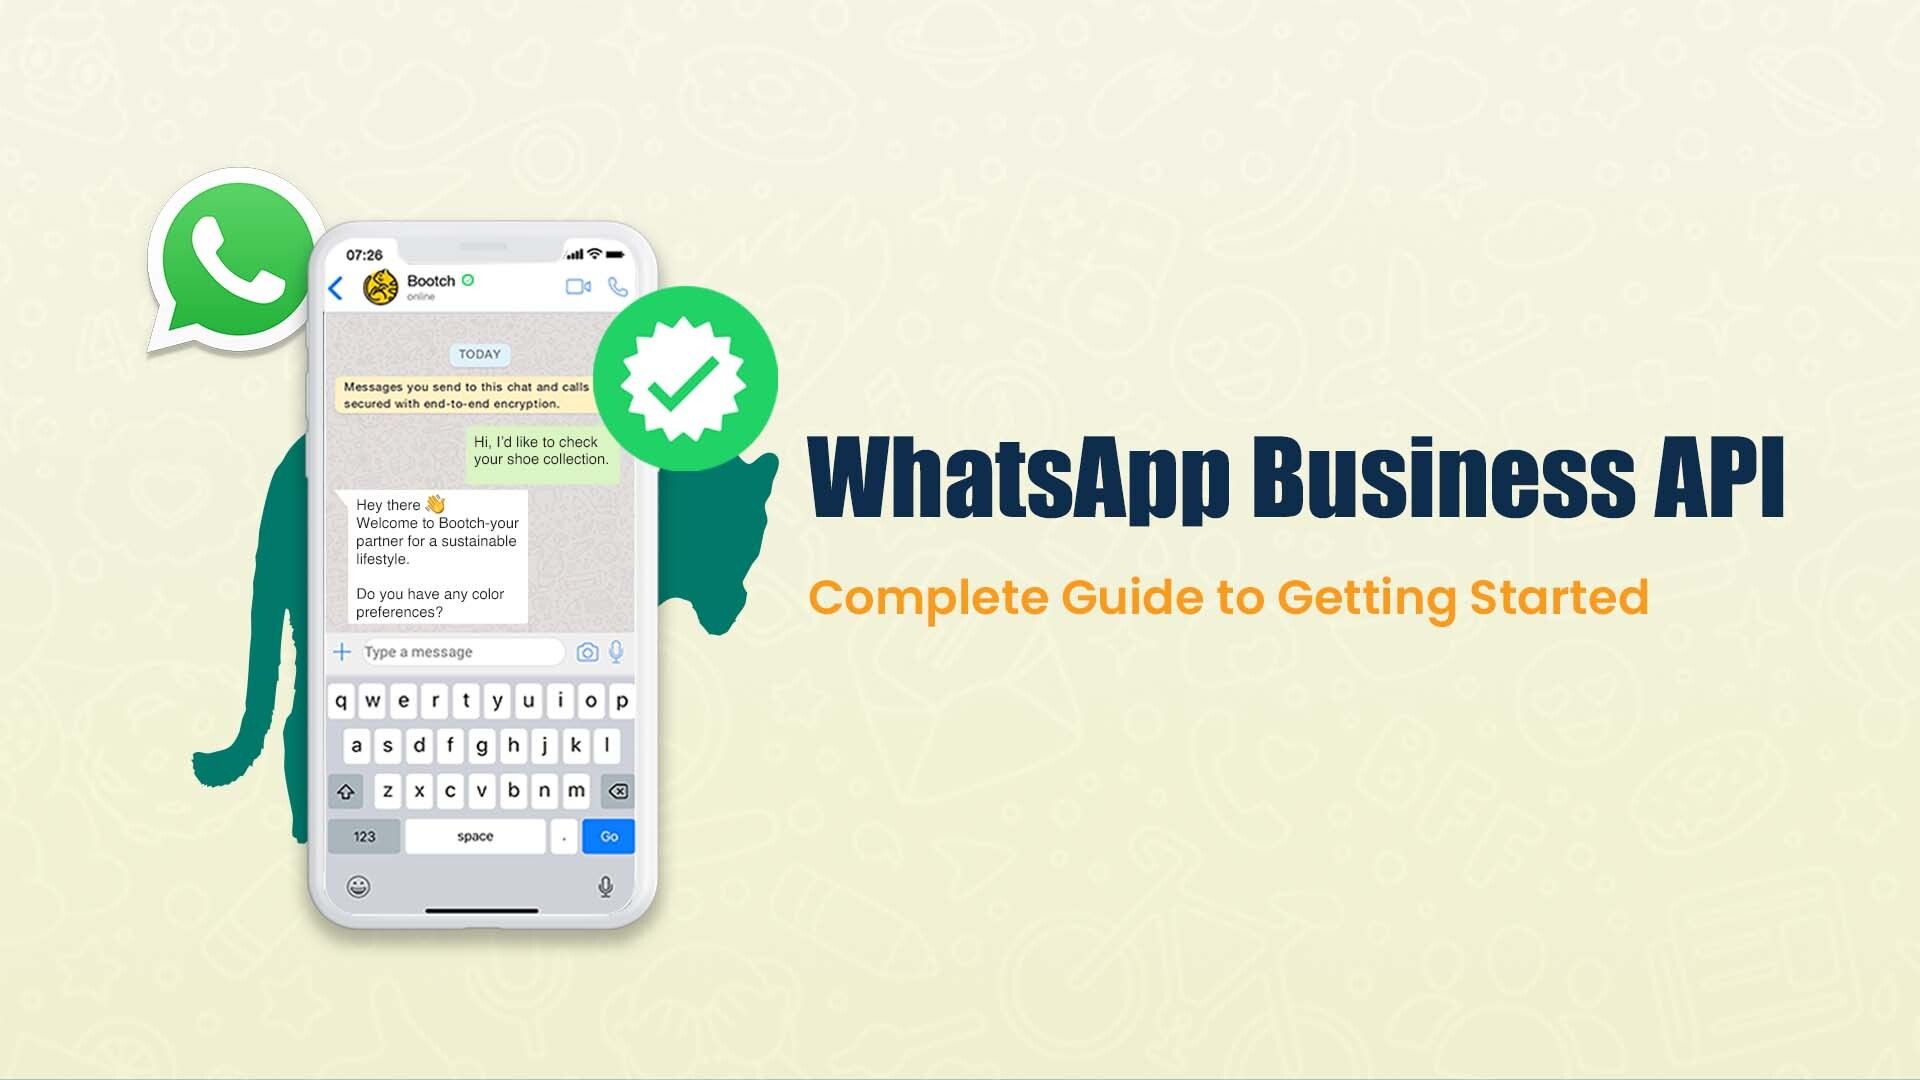 How to Apply for WhatsApp Green Tick Verification?